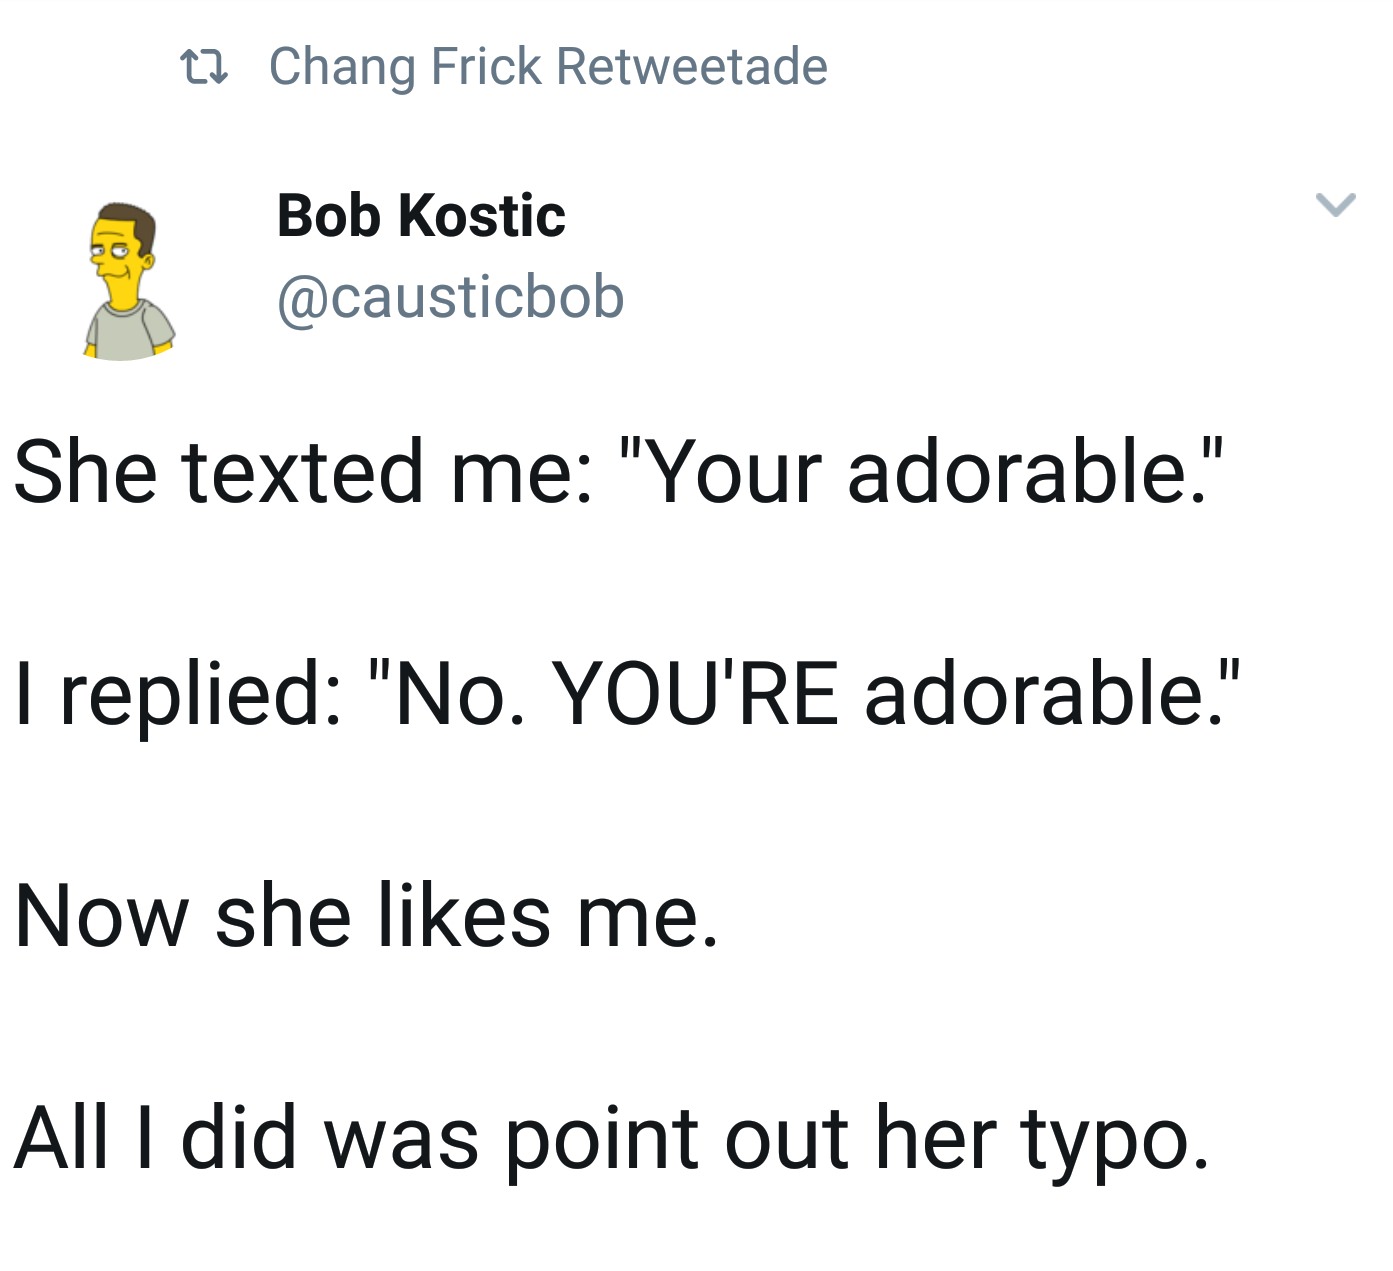 angle - Lz Chang Frick Retweetade Bob Kostic She texted me "Your adorable." I replied "No.You'Re adorable." Now she me. All I did was point out her typo.